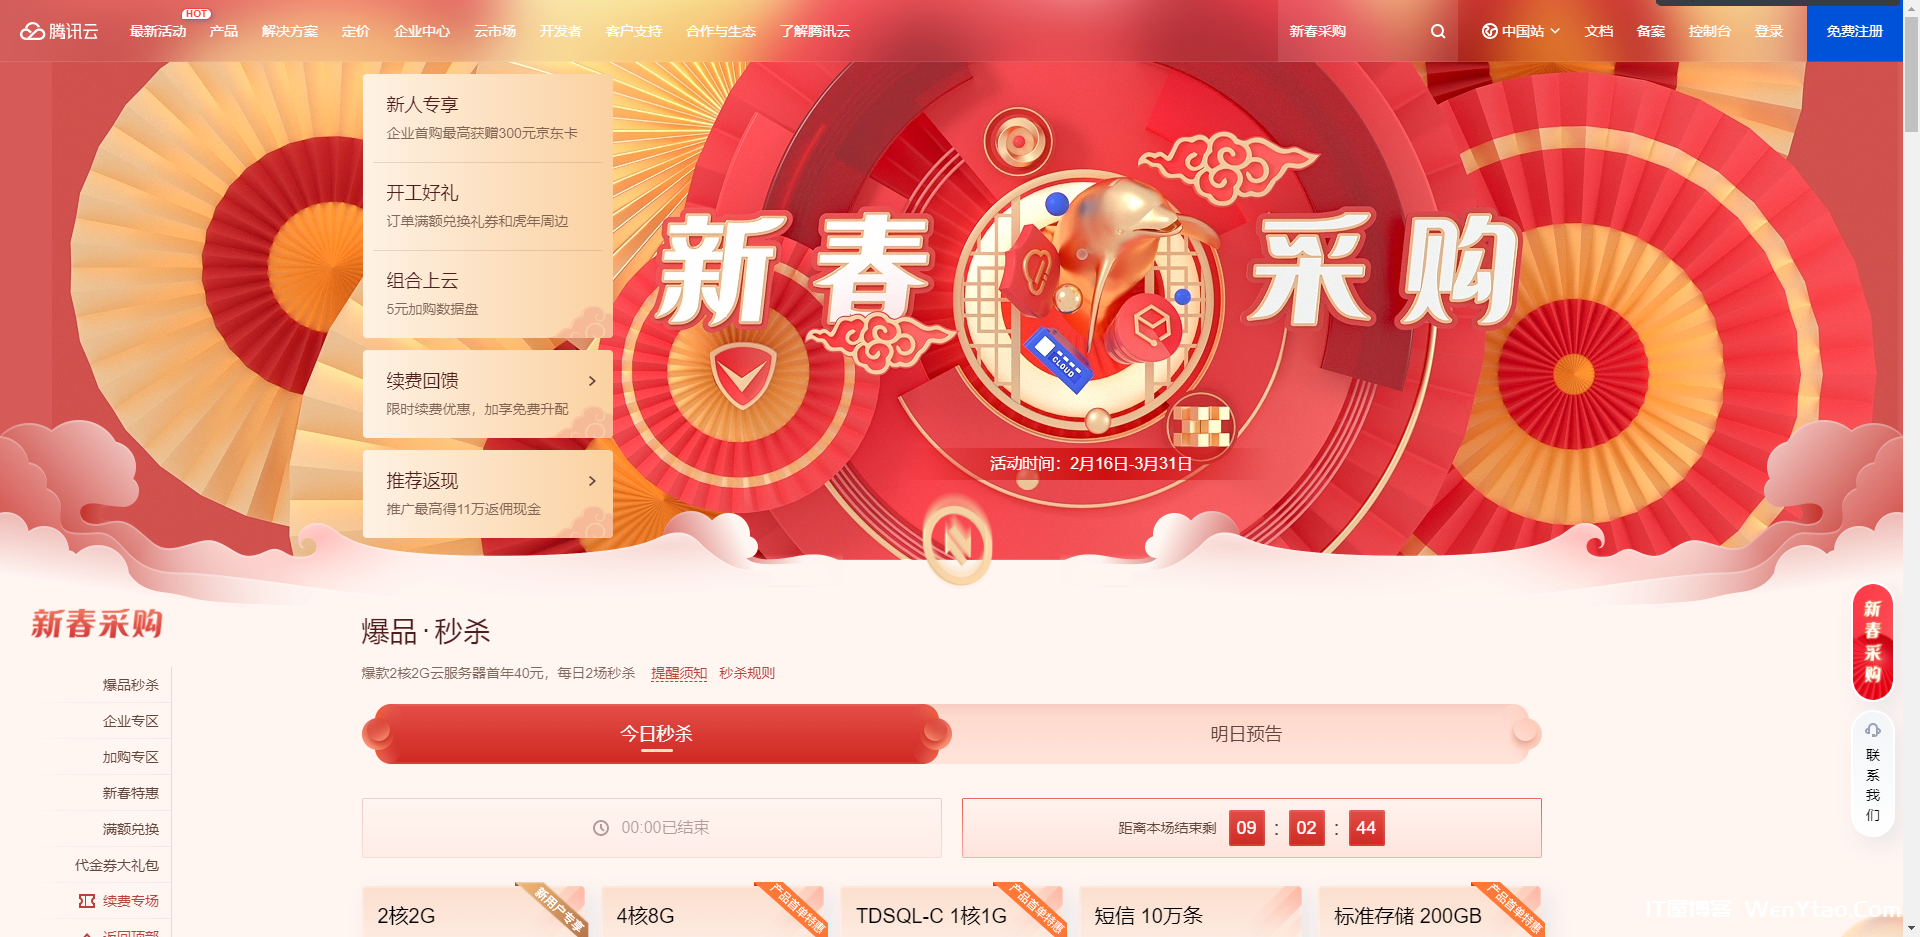  Recently, Tencent Cloud launched the 2022 Spring Festival purchase promotional campaign, with a limited time and limited quantity of seconds as low as 40 yuan/year. It also supports the windwos system for the first time, which is just against the weather. It further explores the bottom line of the cloud server price. Friends who have used it for a long time suggest buying it for three years at a time, with higher cost performance and renewal fees